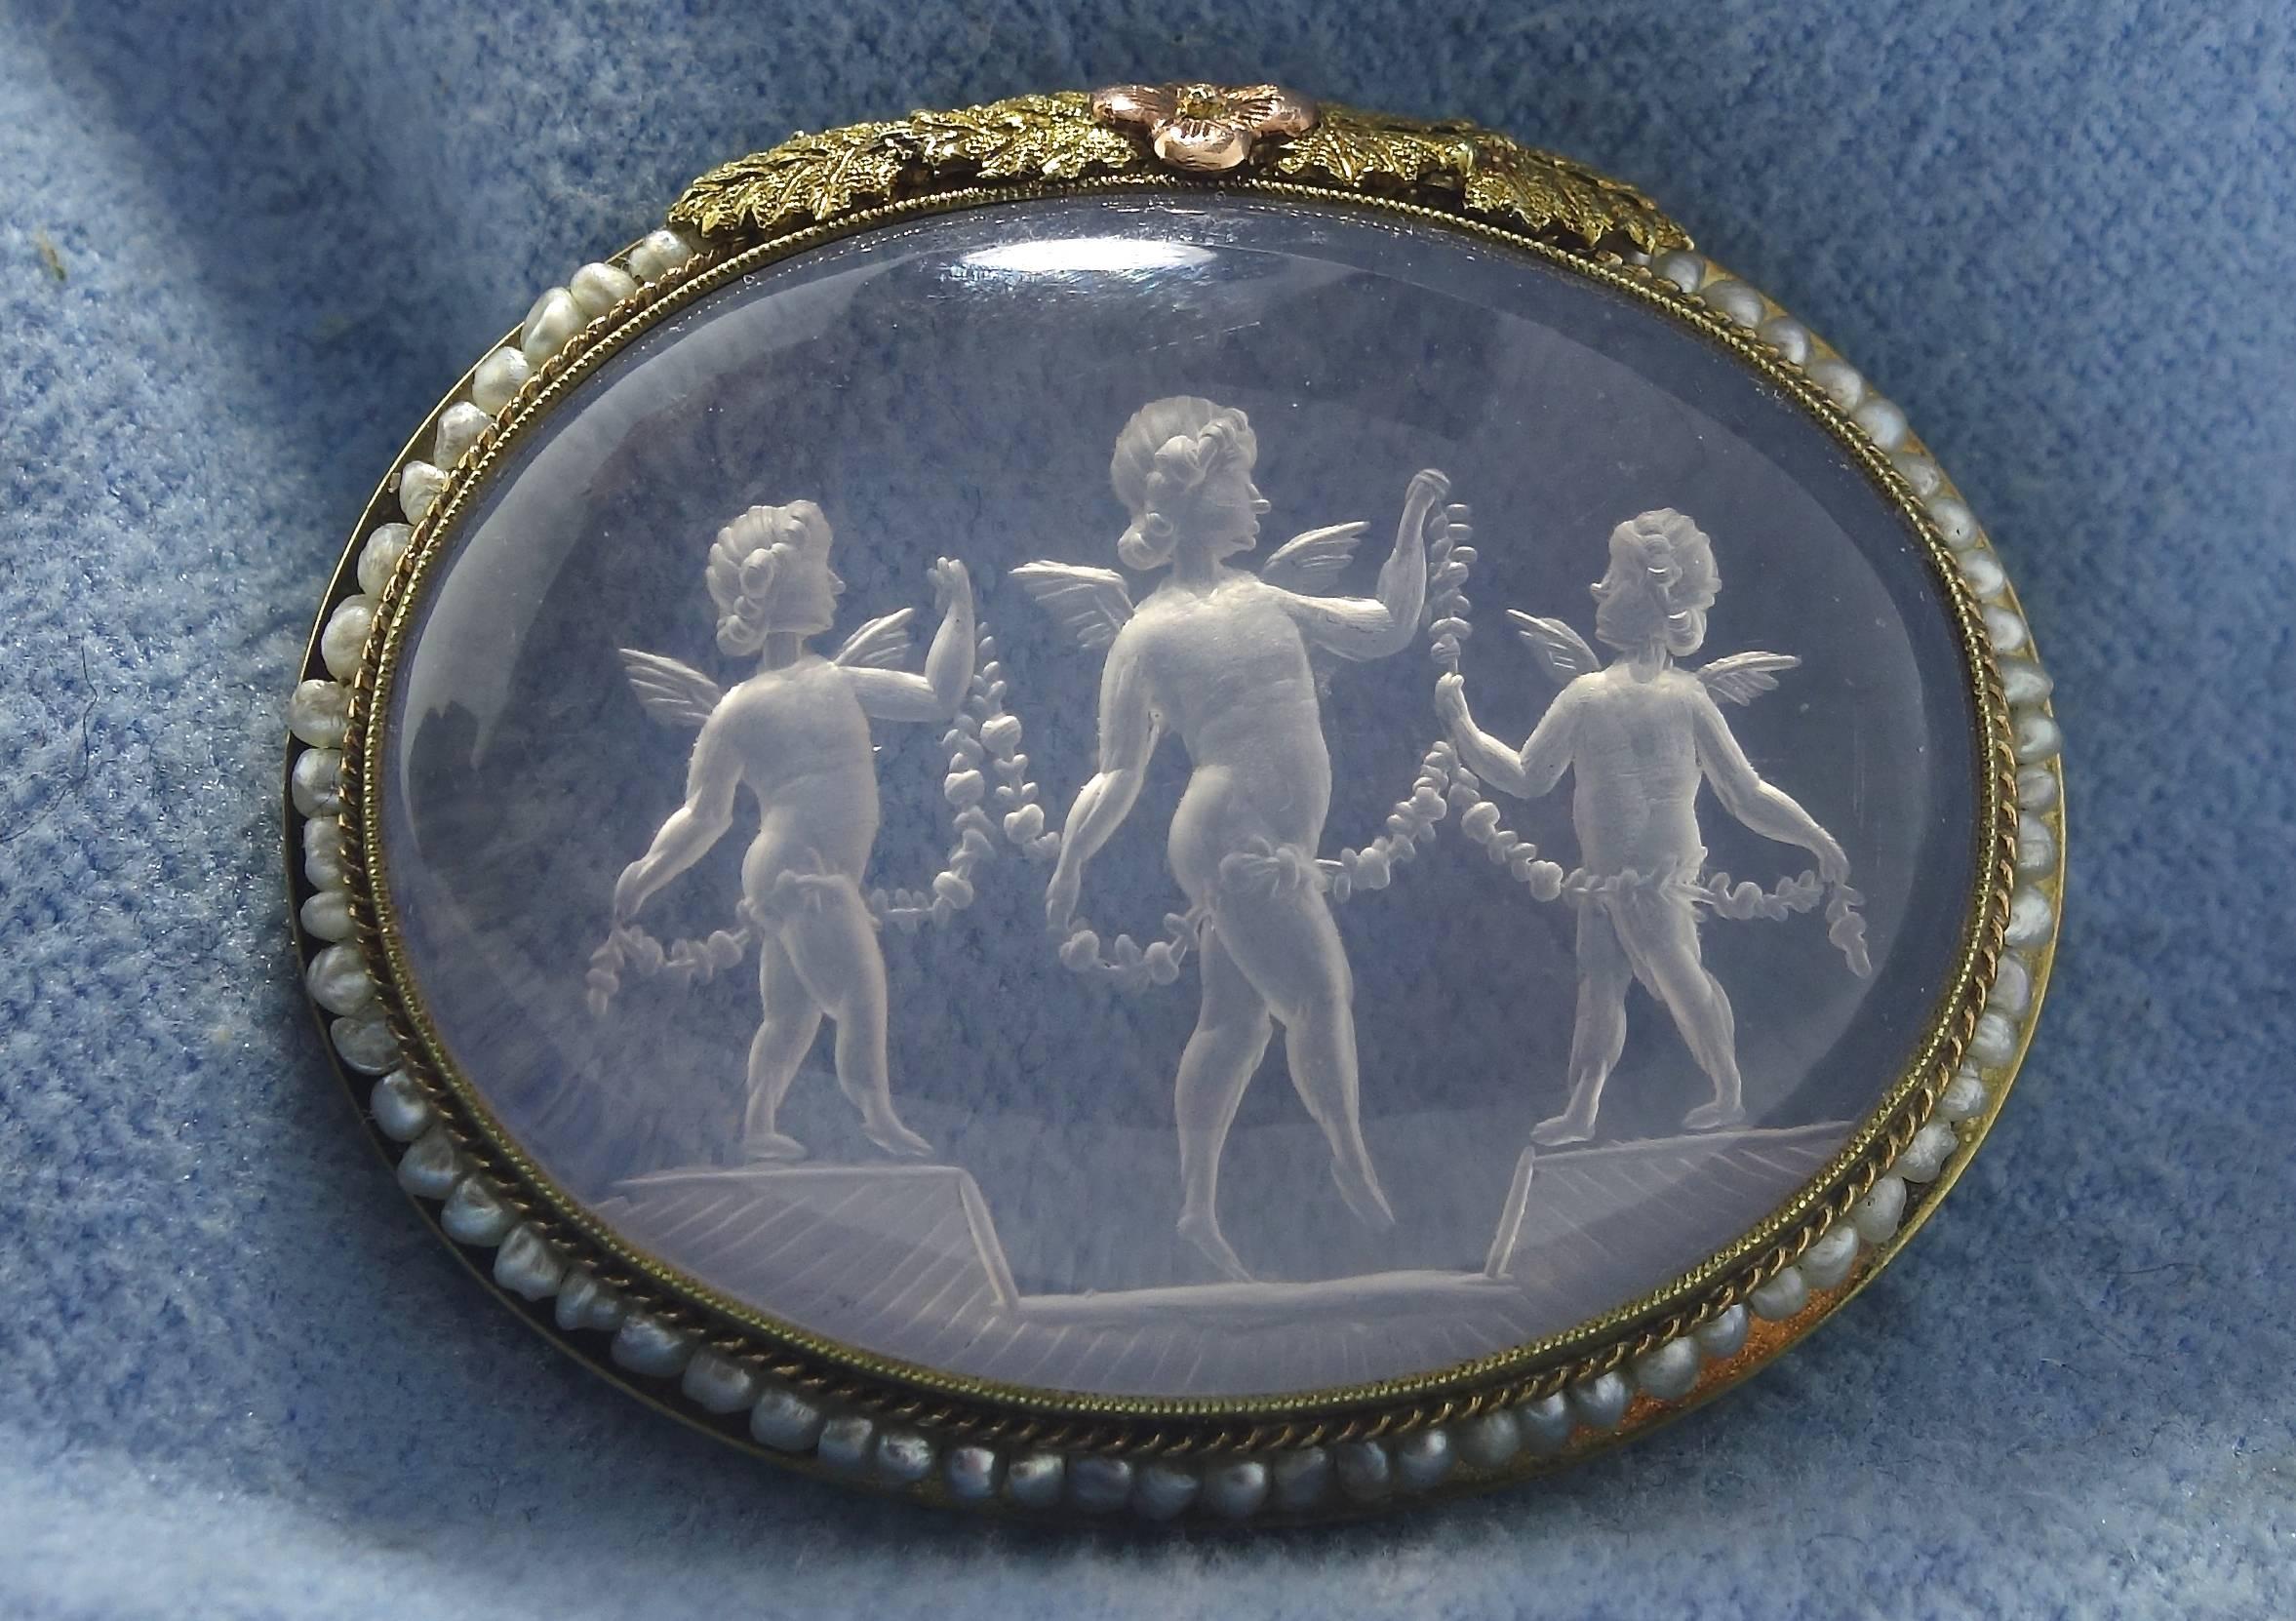 Neoclassical Antique Carving Brooch, circa 1890